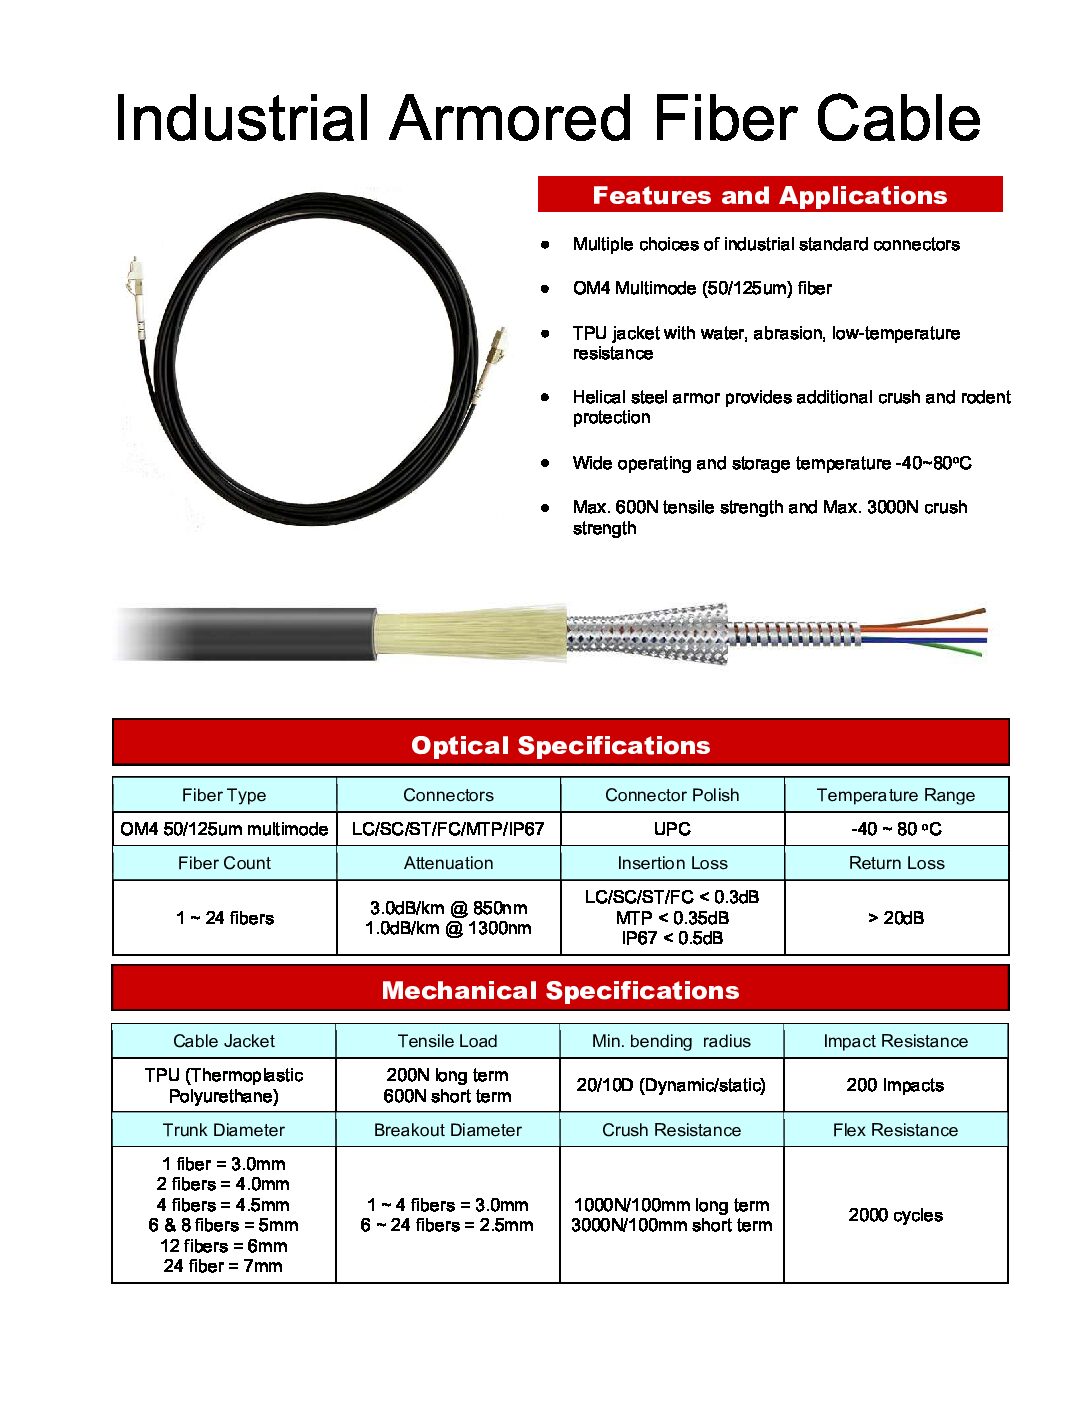 Industrial Armored Fiber Cable v1 – Phrontier Technologies